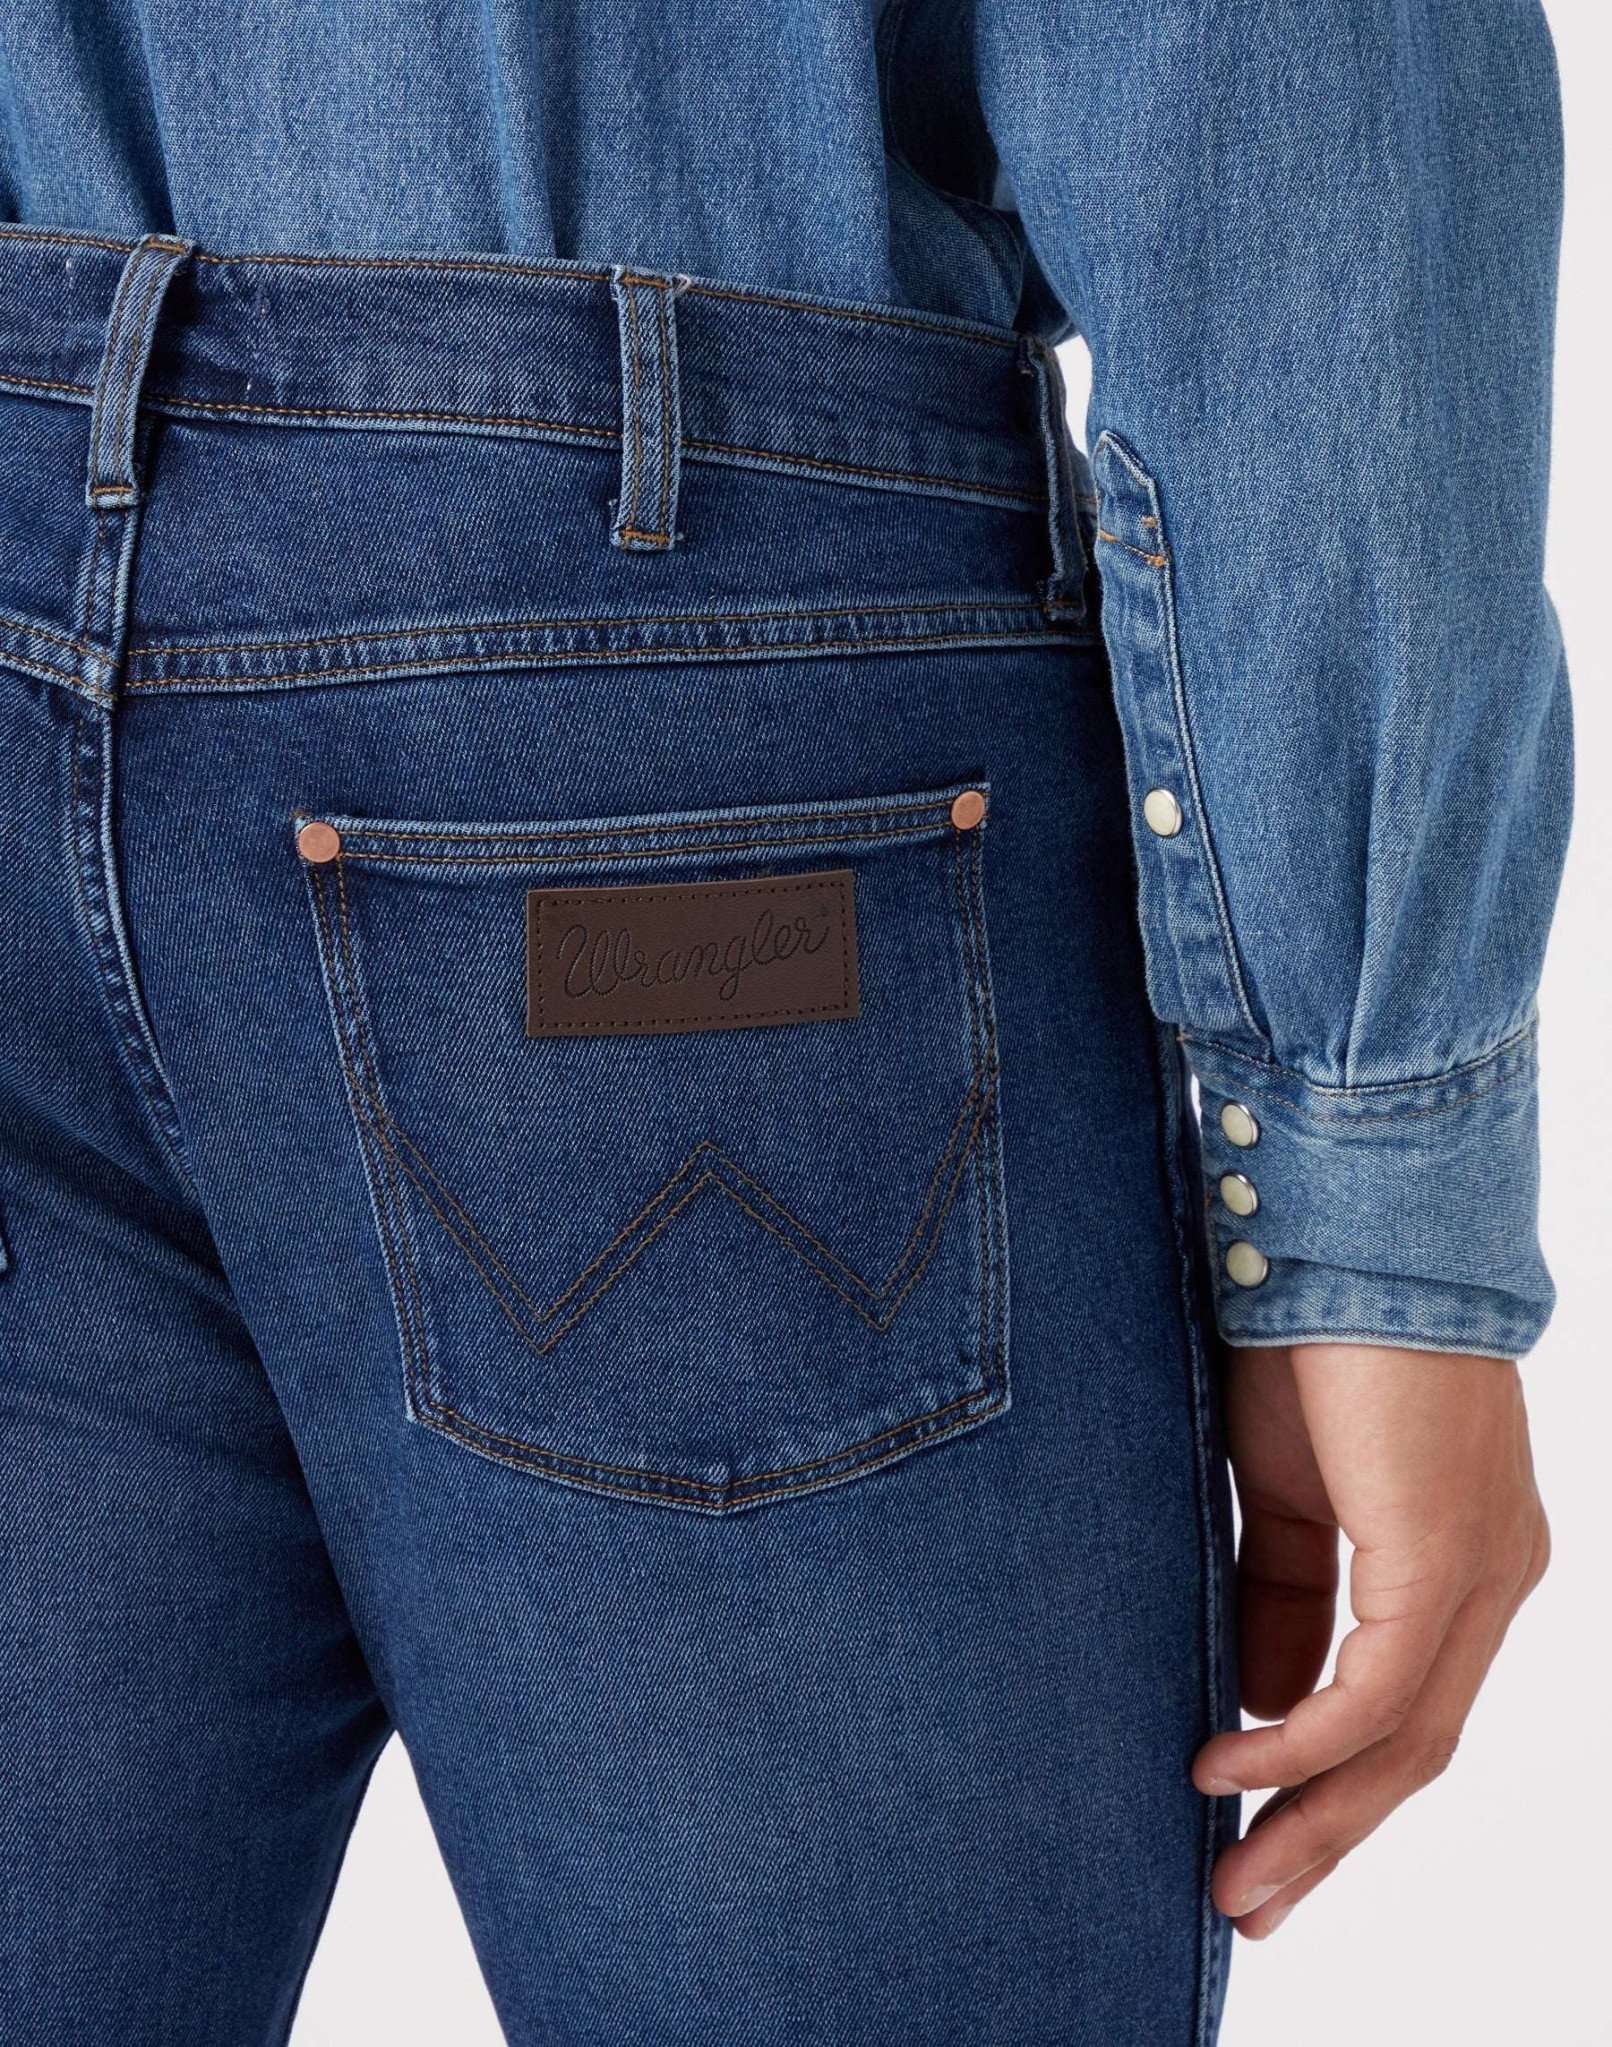 Larston Low Stretch in The Rock Jeans Wrangler   